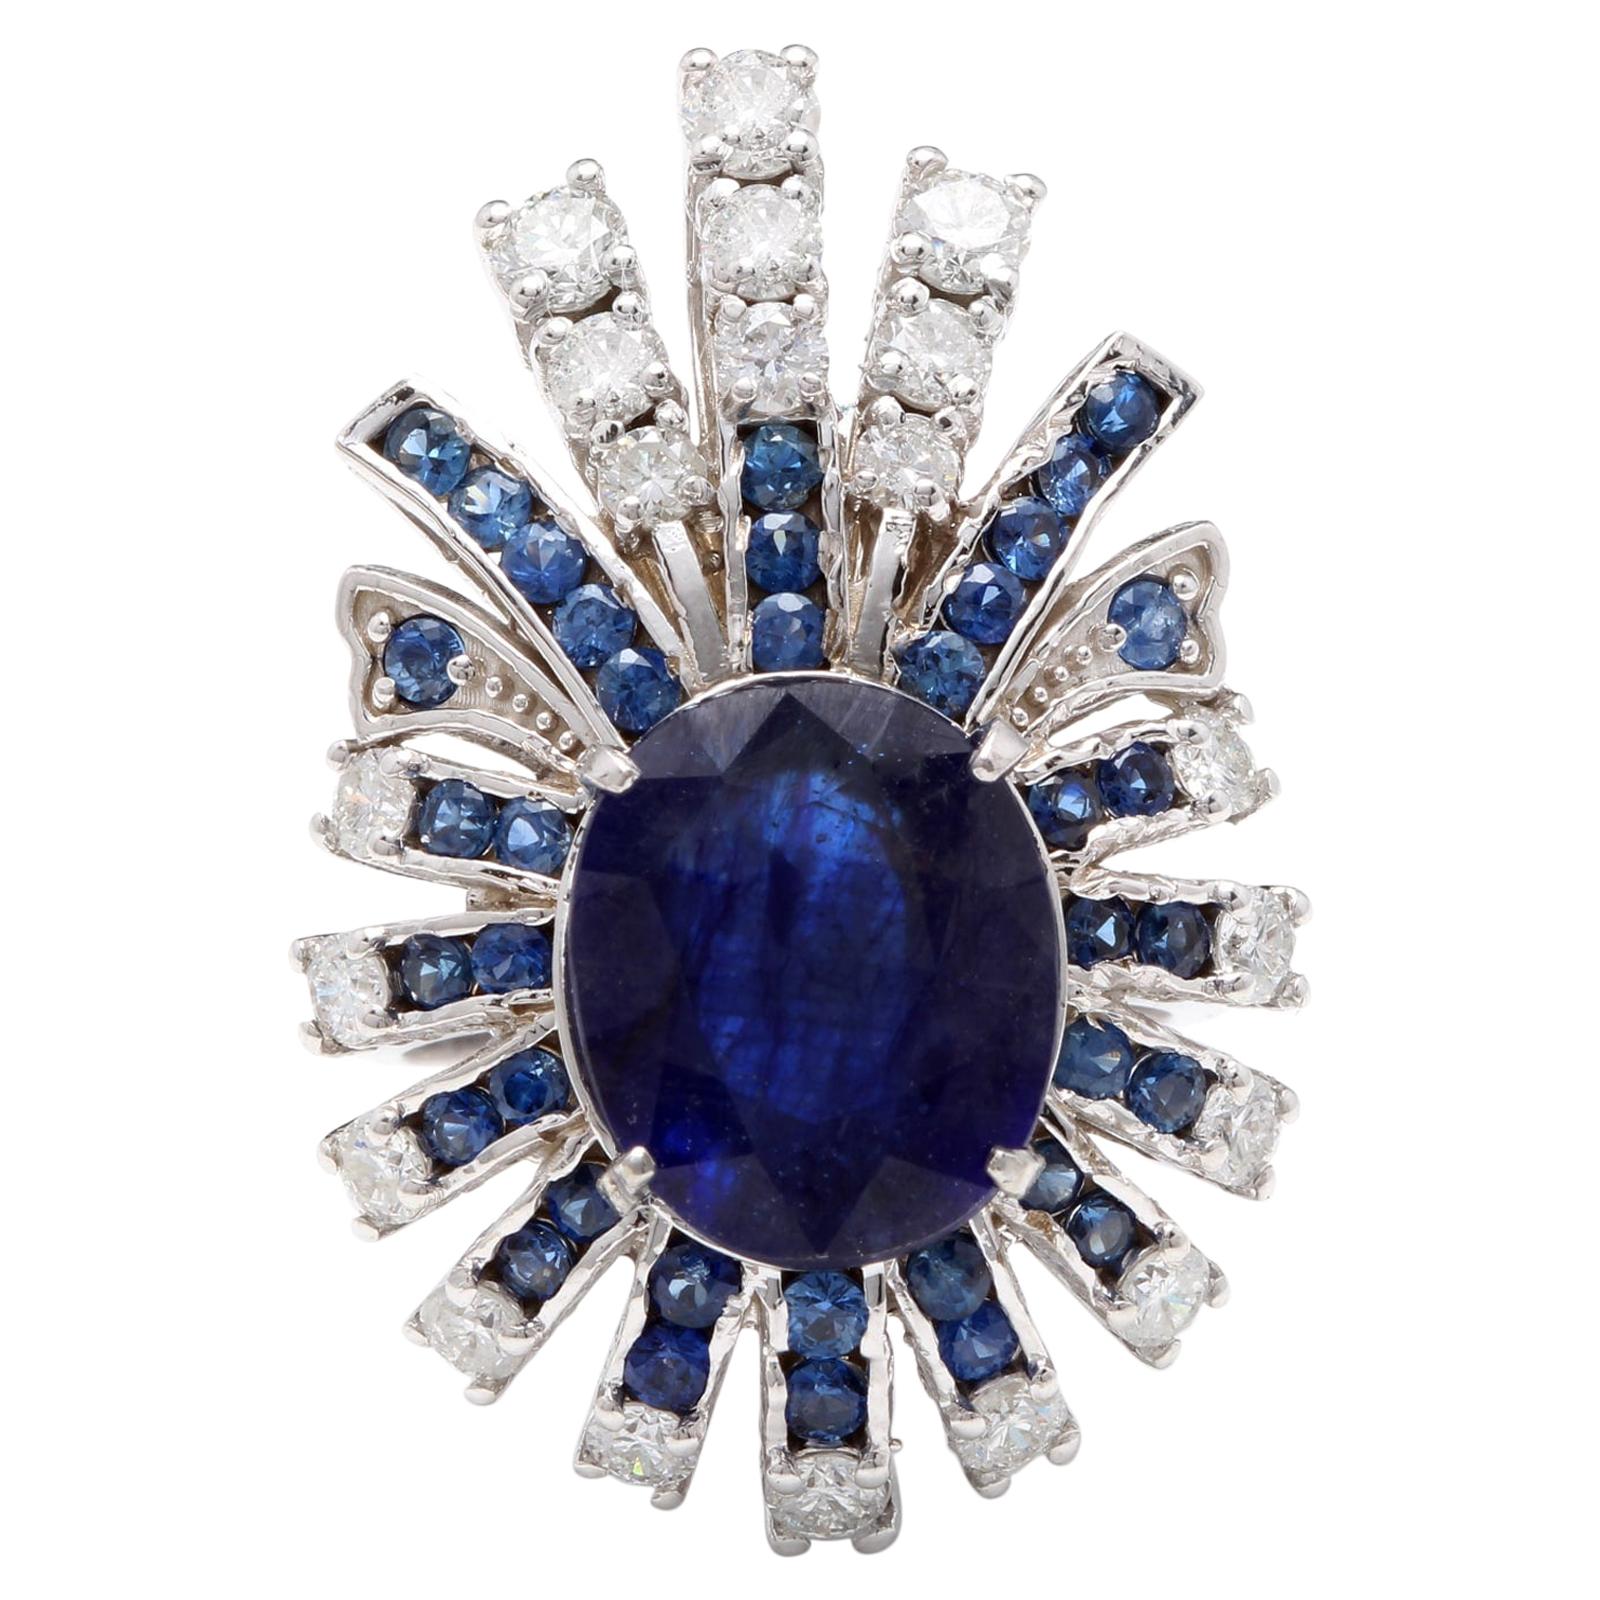 10.25 Carat Exquisite Natural Blue Sapphire and Diamond 14K Solid White Gold